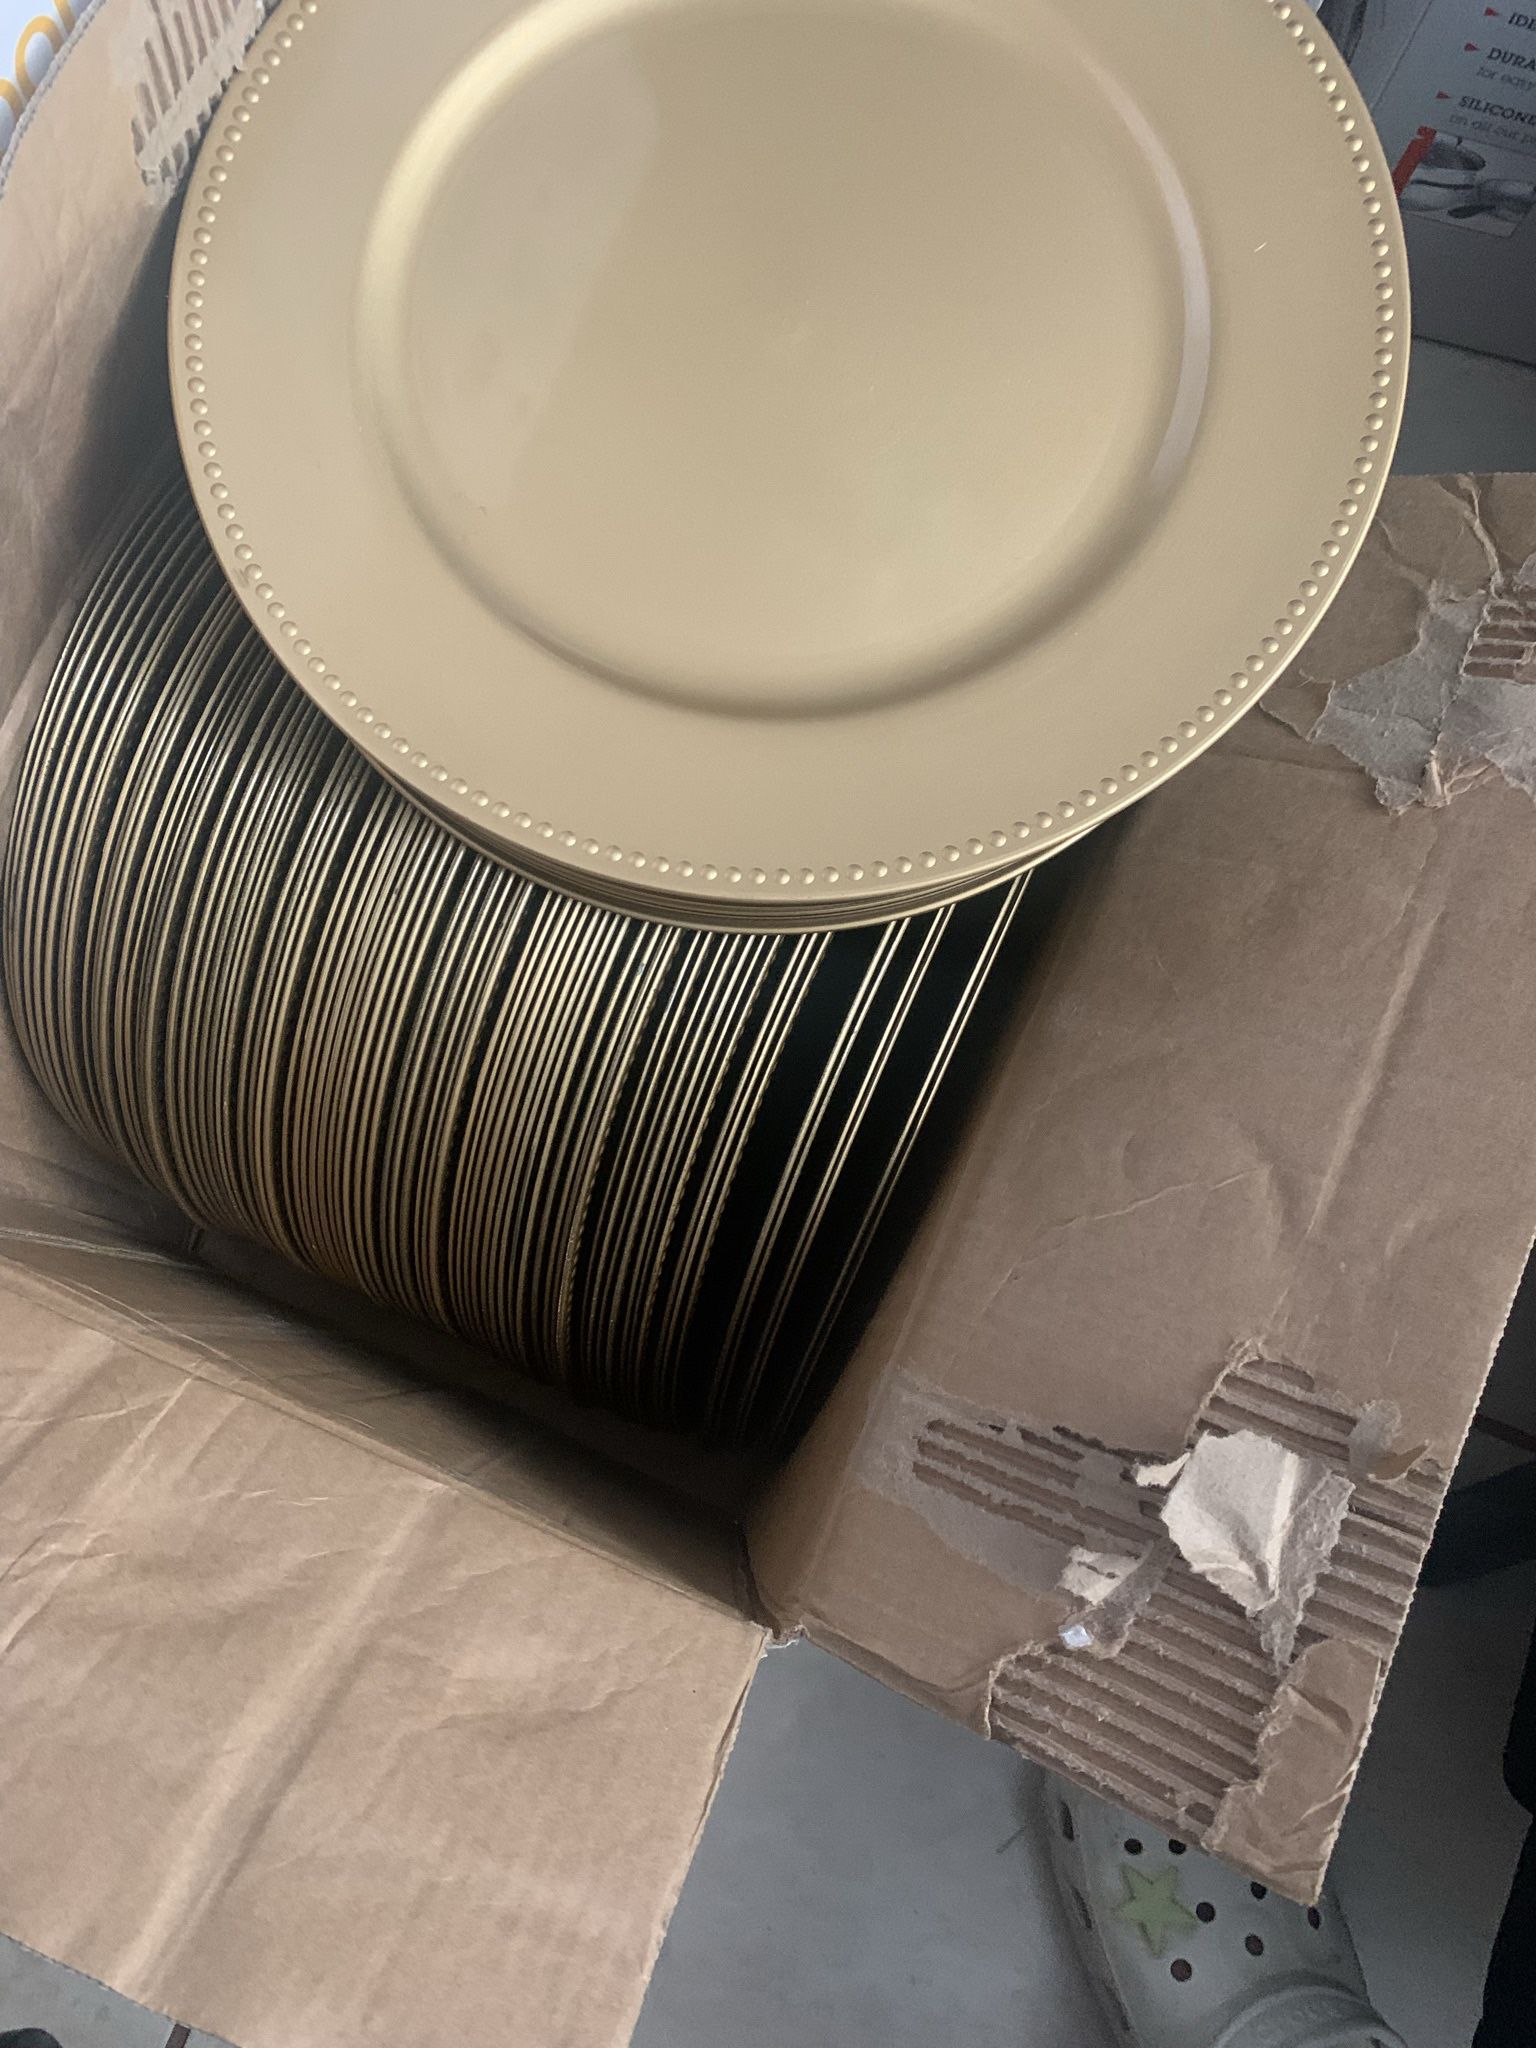 Charger Plates